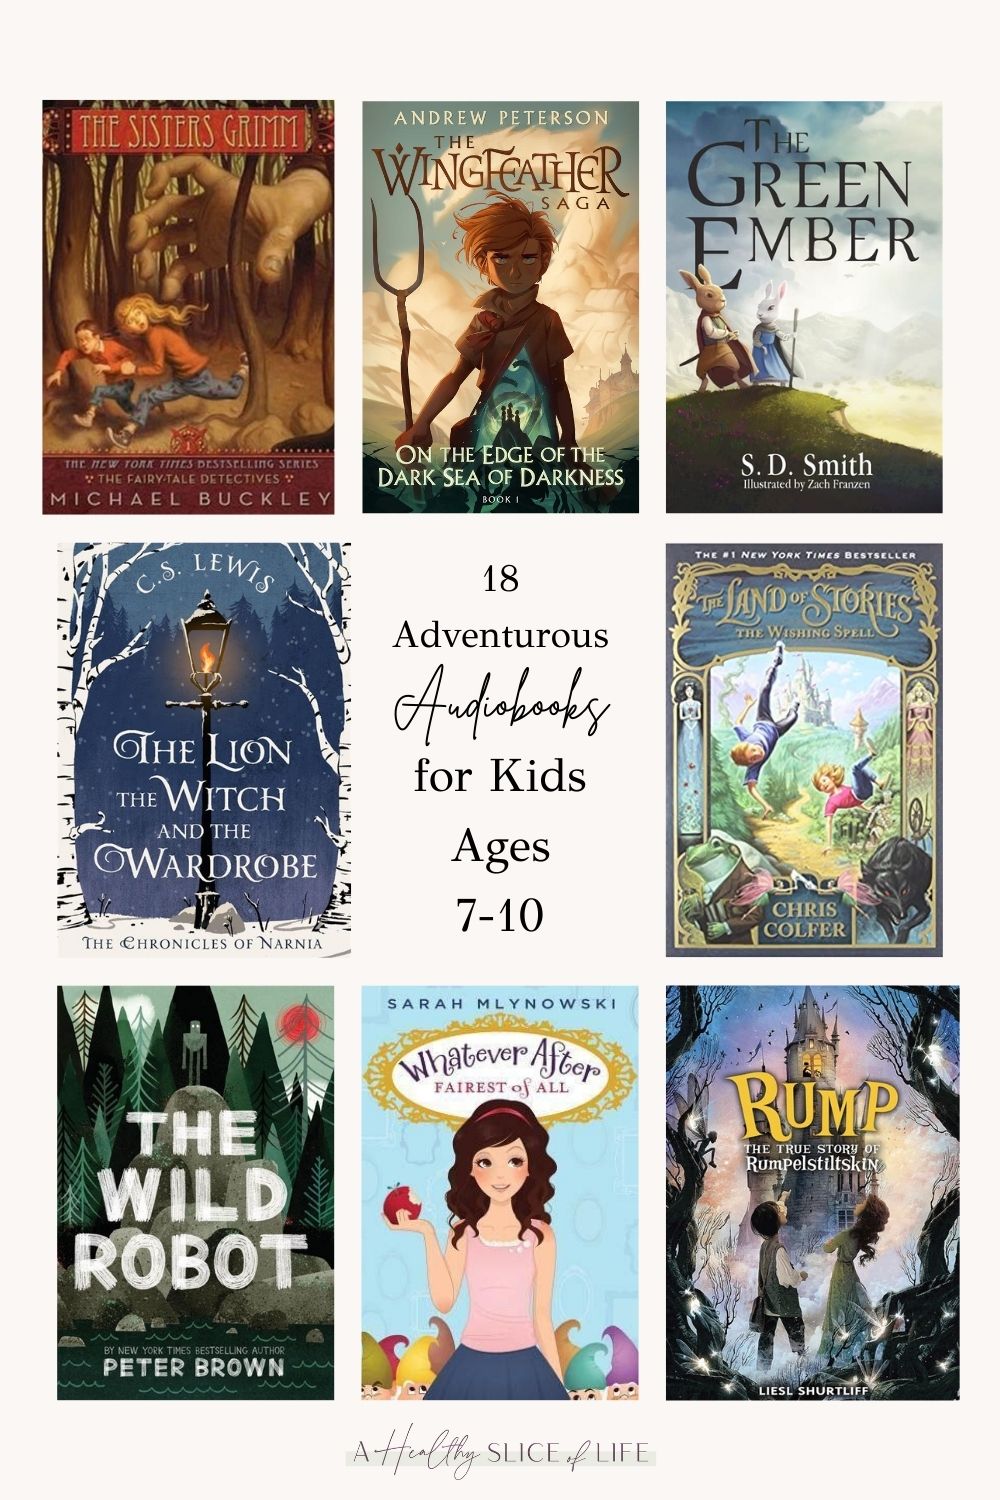 The Best Audiobooks for Kids Ages 7-10 - A Healthy Slice of Life